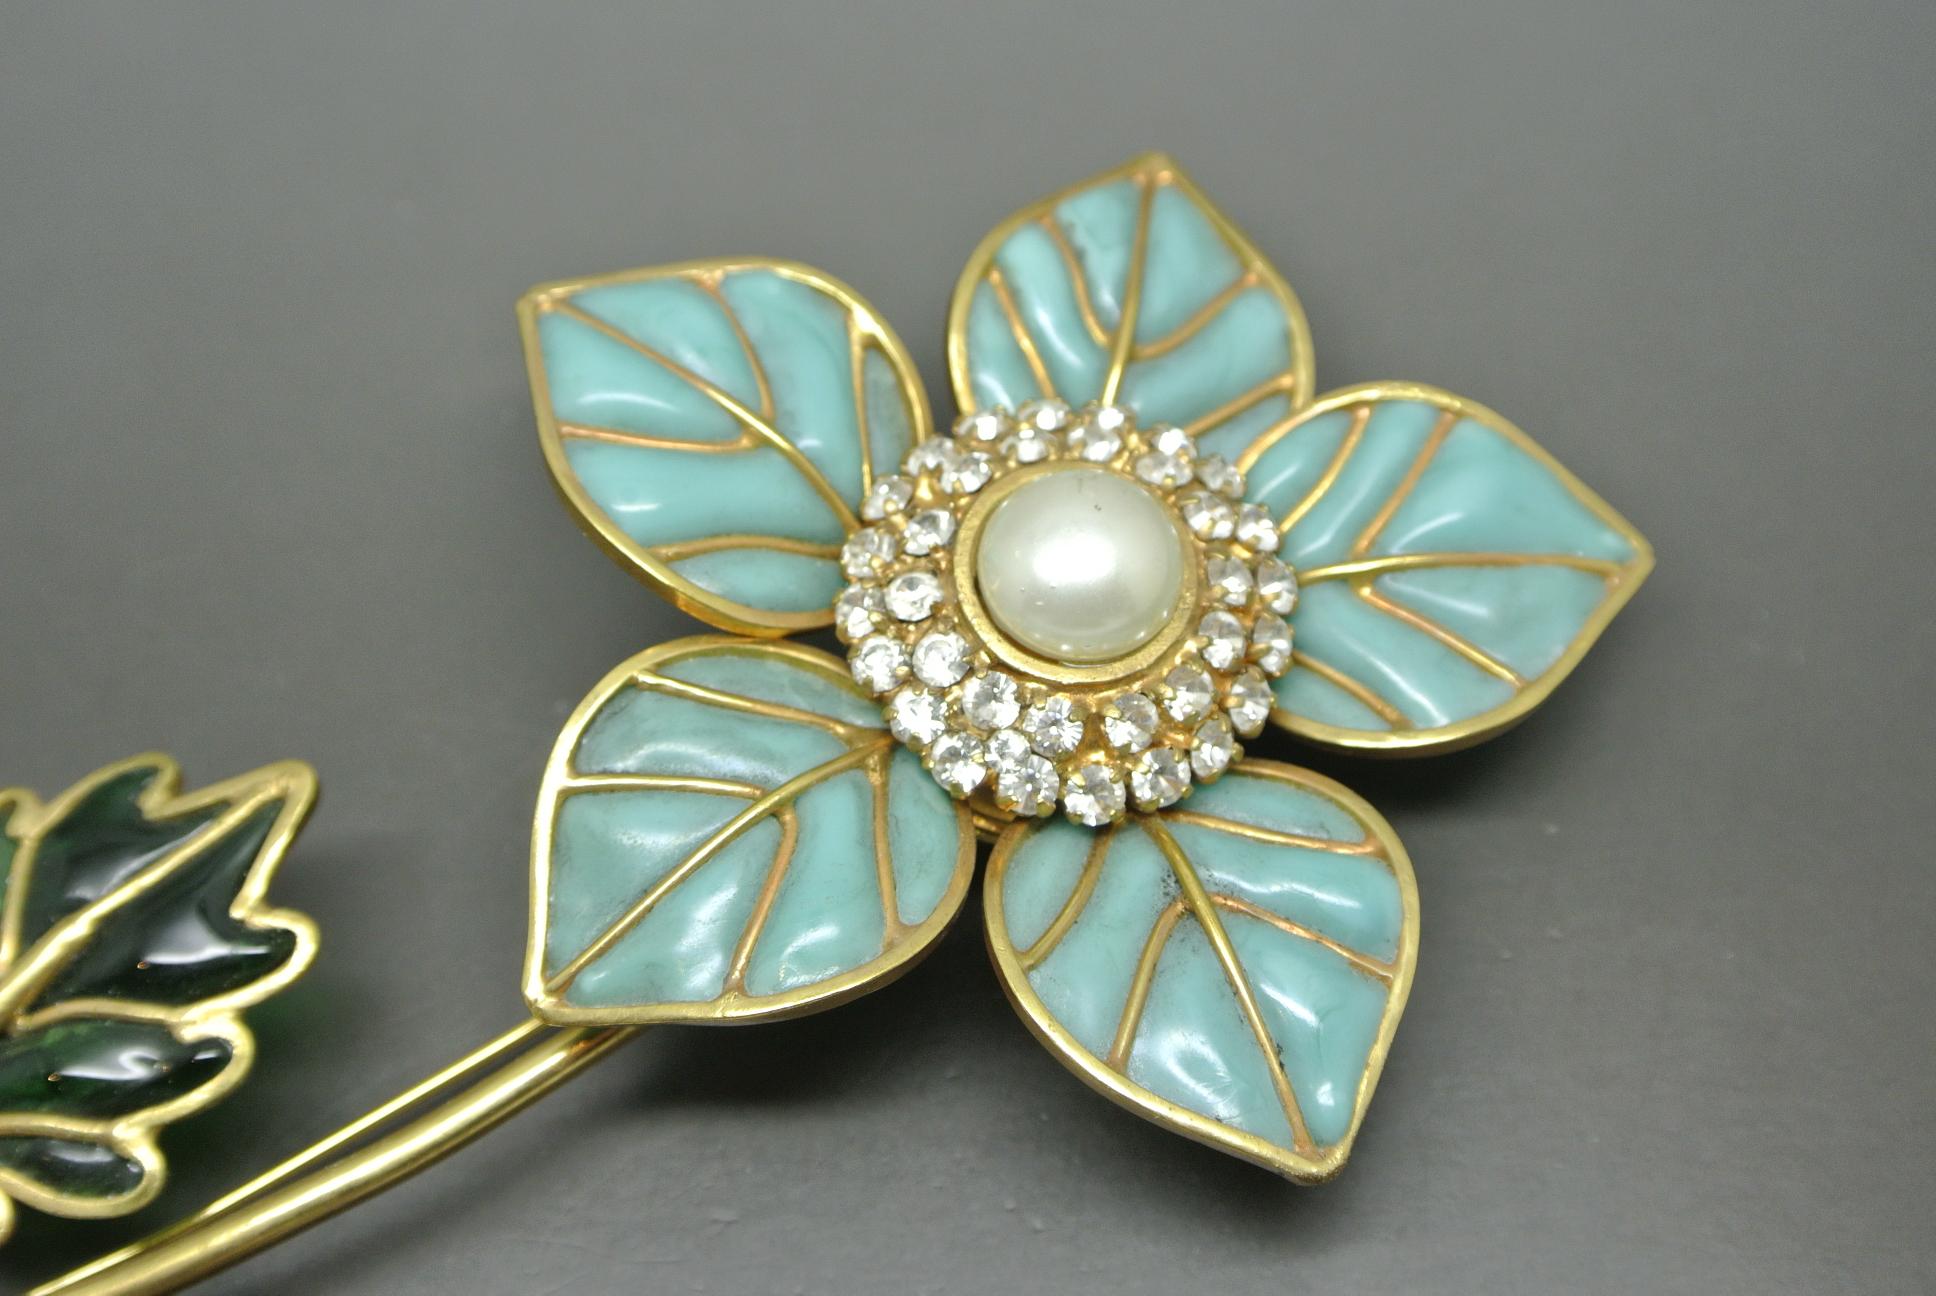 Cristobal by Gripoix Made in France Blue Flower Poured Glass Large Brooch 2